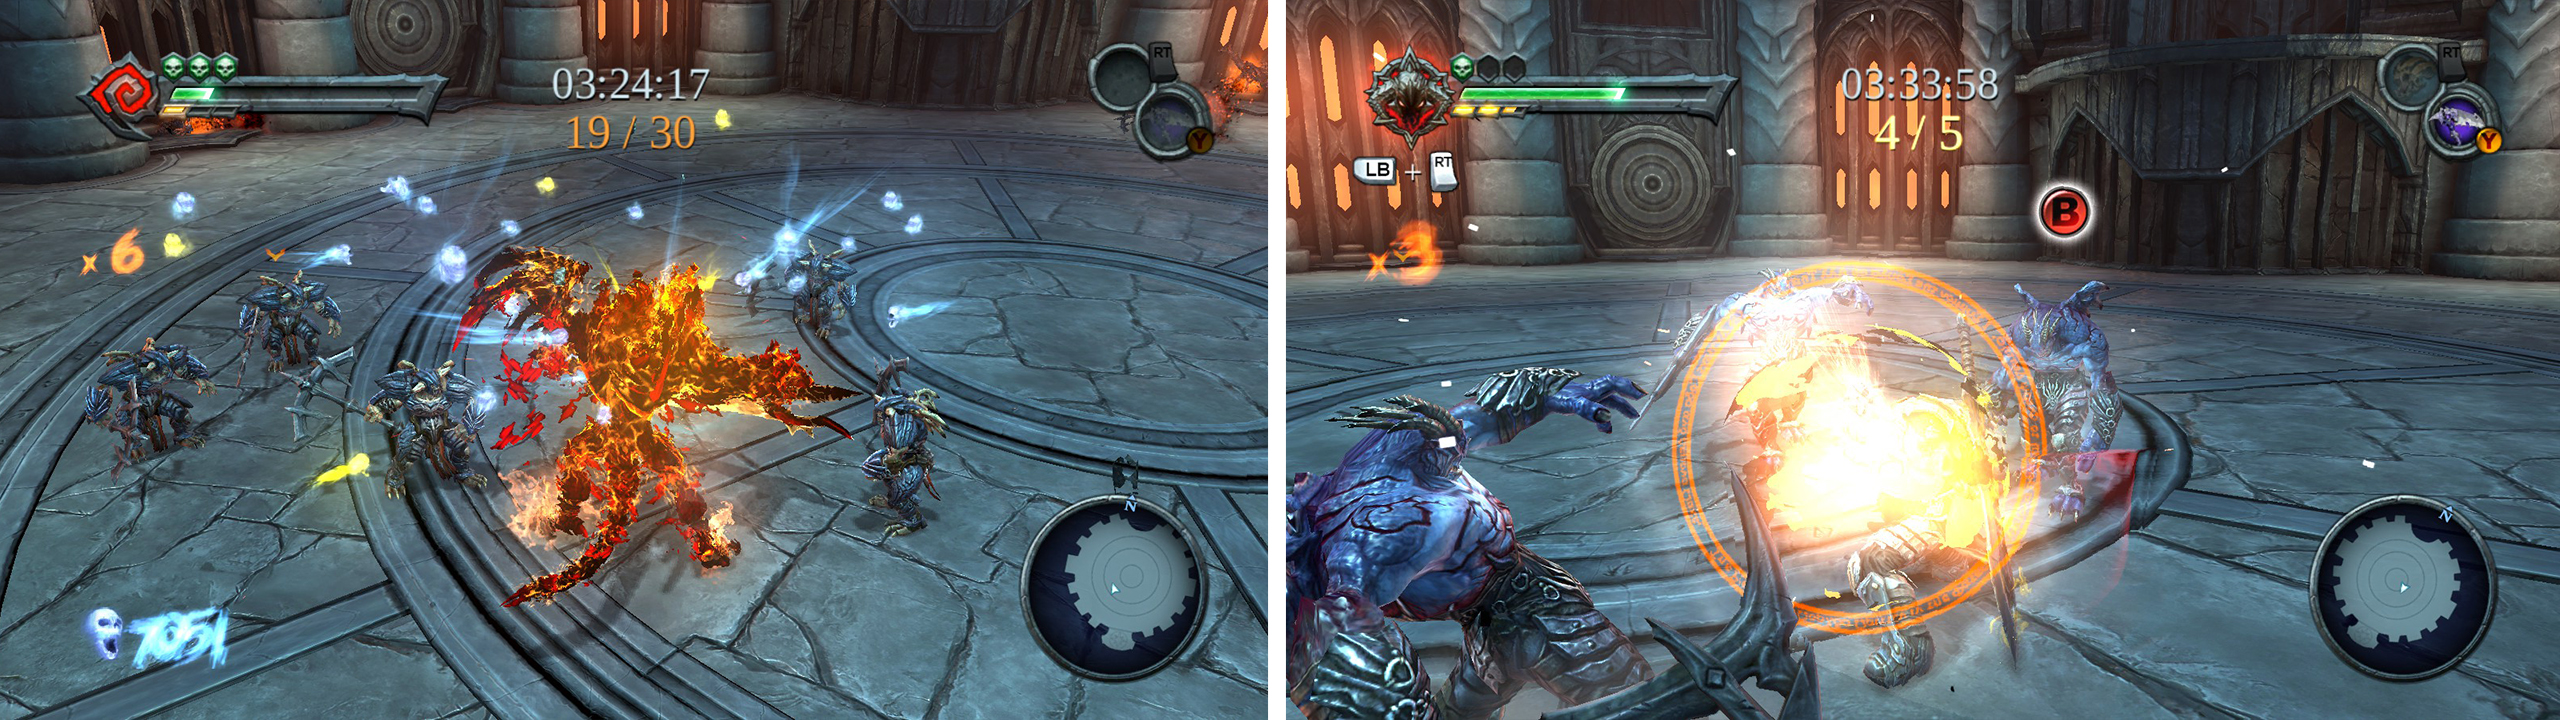 Use finisher attacks to build Chaos quicker to trigger Chaos Form in Challenge 7 (left). Challenge 8 is all about practicing counter-attacks (right).